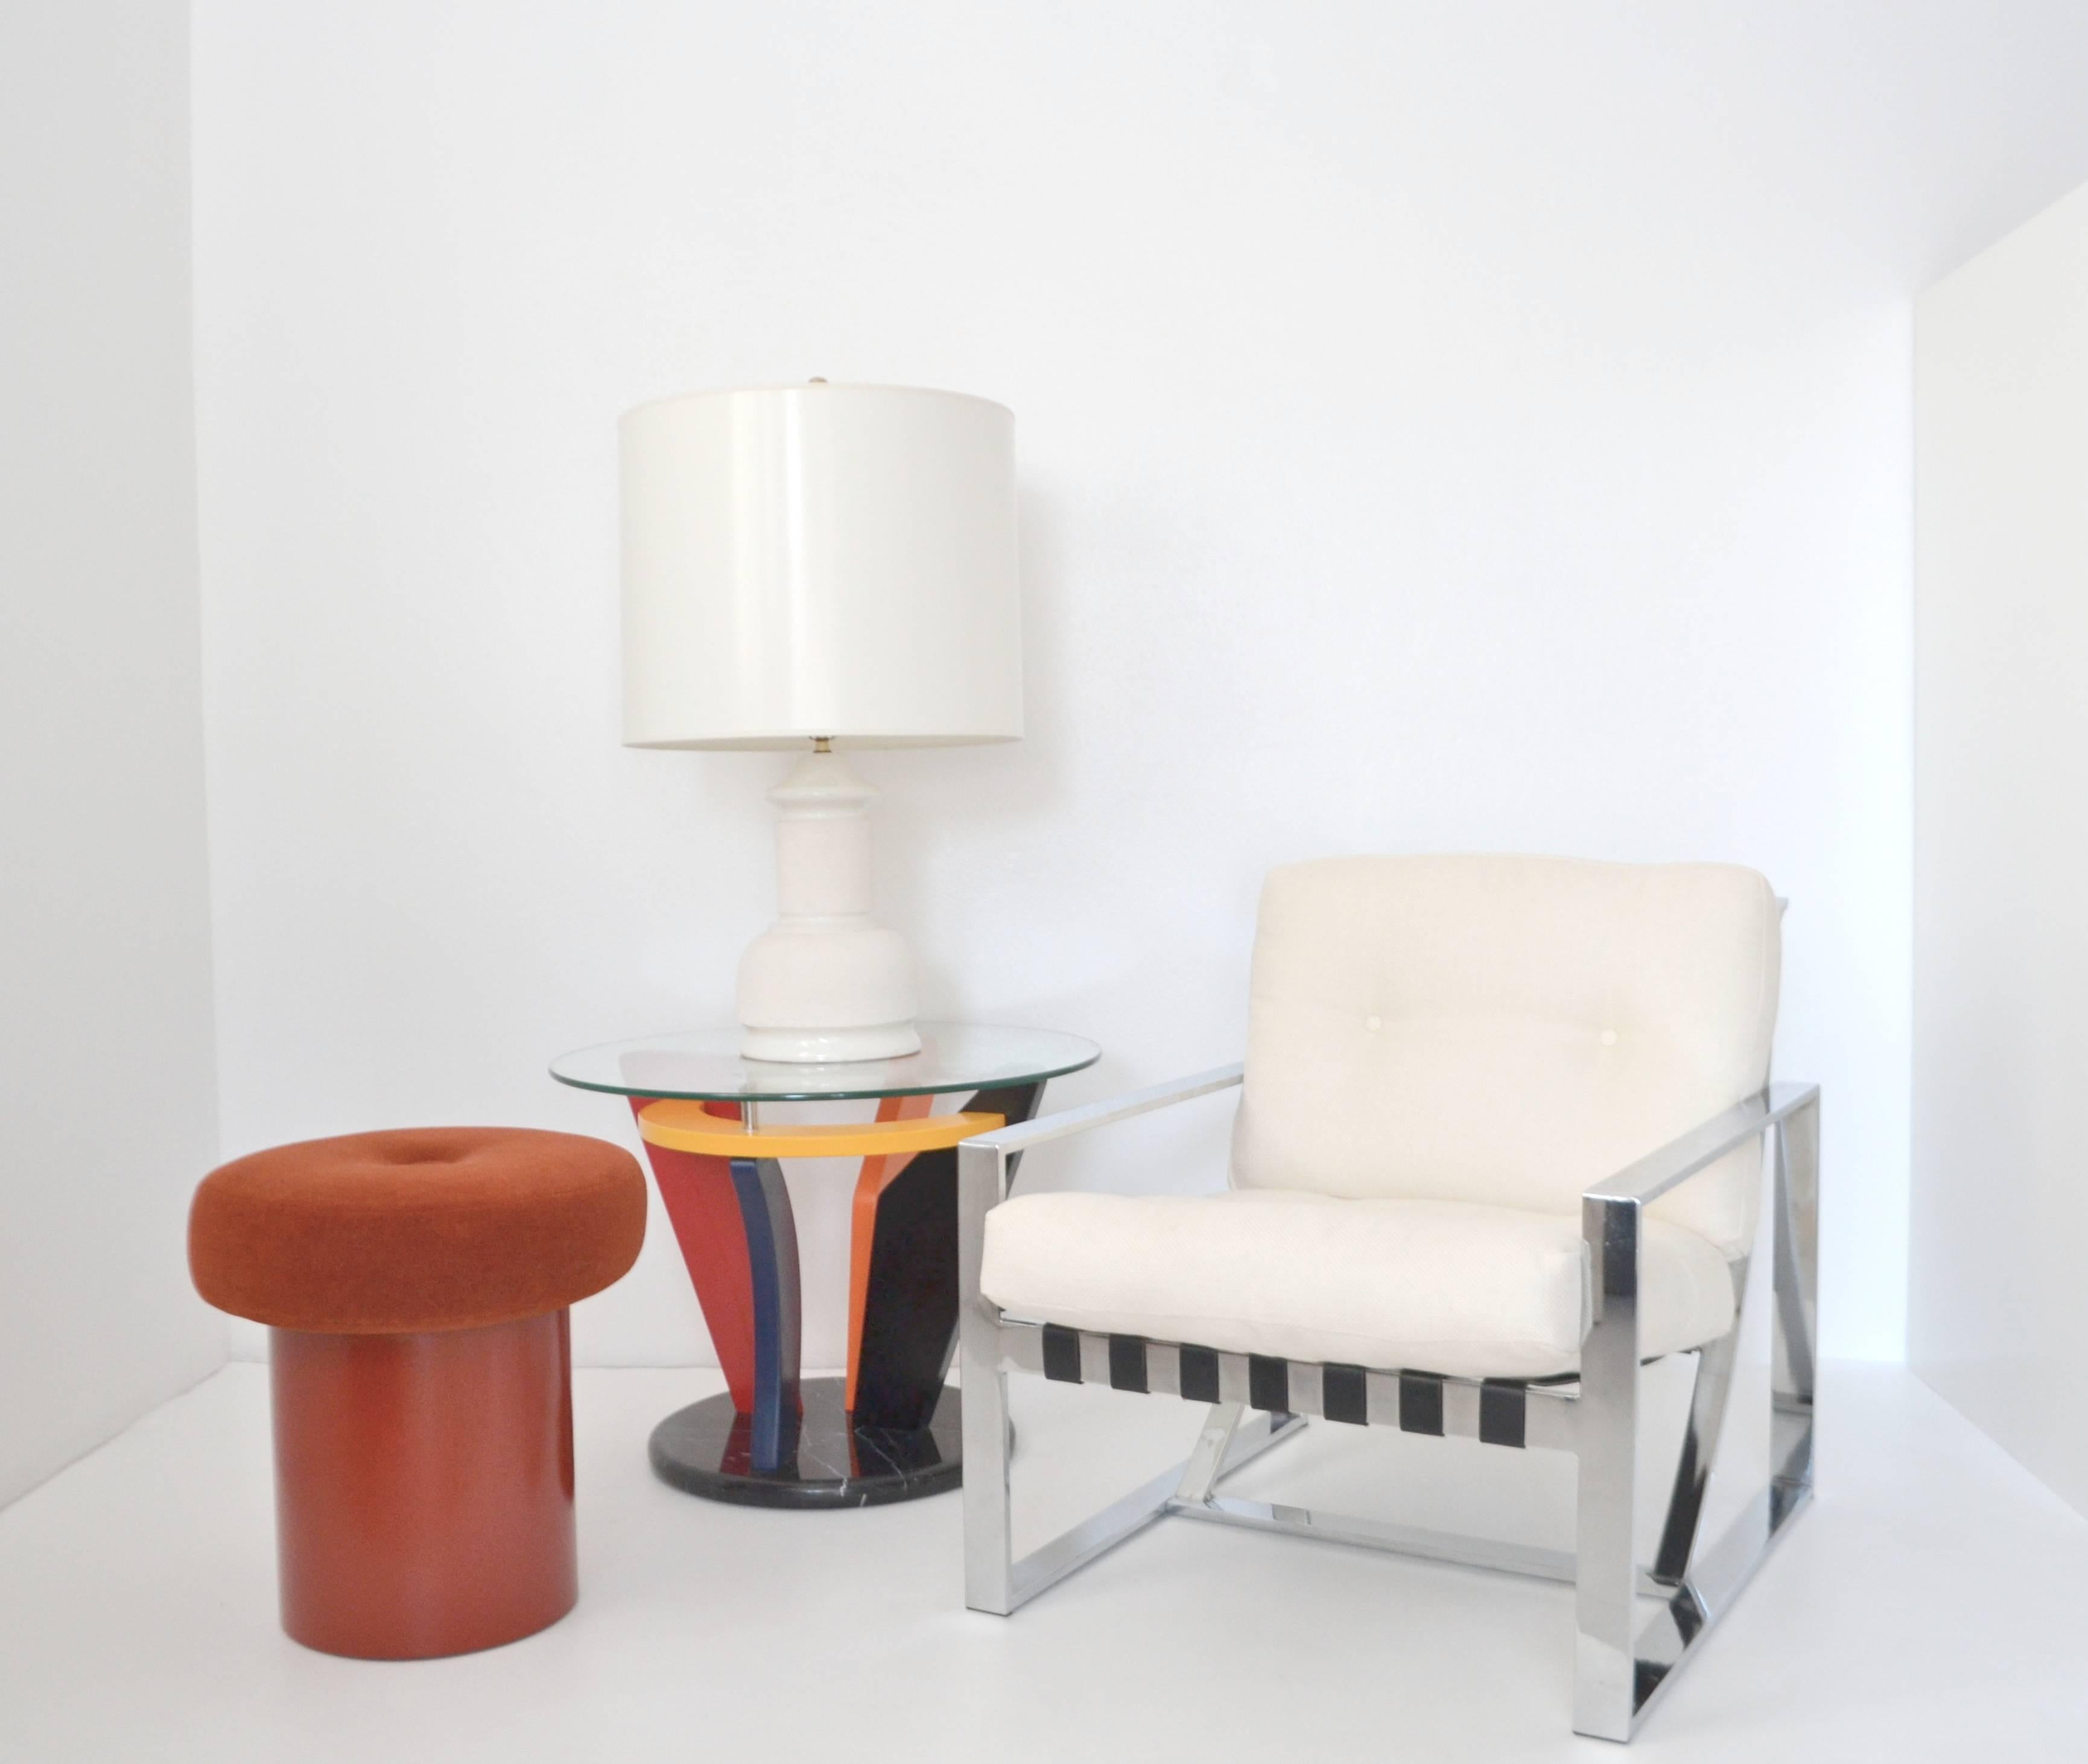 Glamorous pair of Italian Neo Rationalist club chairs, circa 1970s. These striking sculptural polished chrome framed button tufted lounge chairs are upholstered in a natural cream white nubby cotton linen blend fabric.